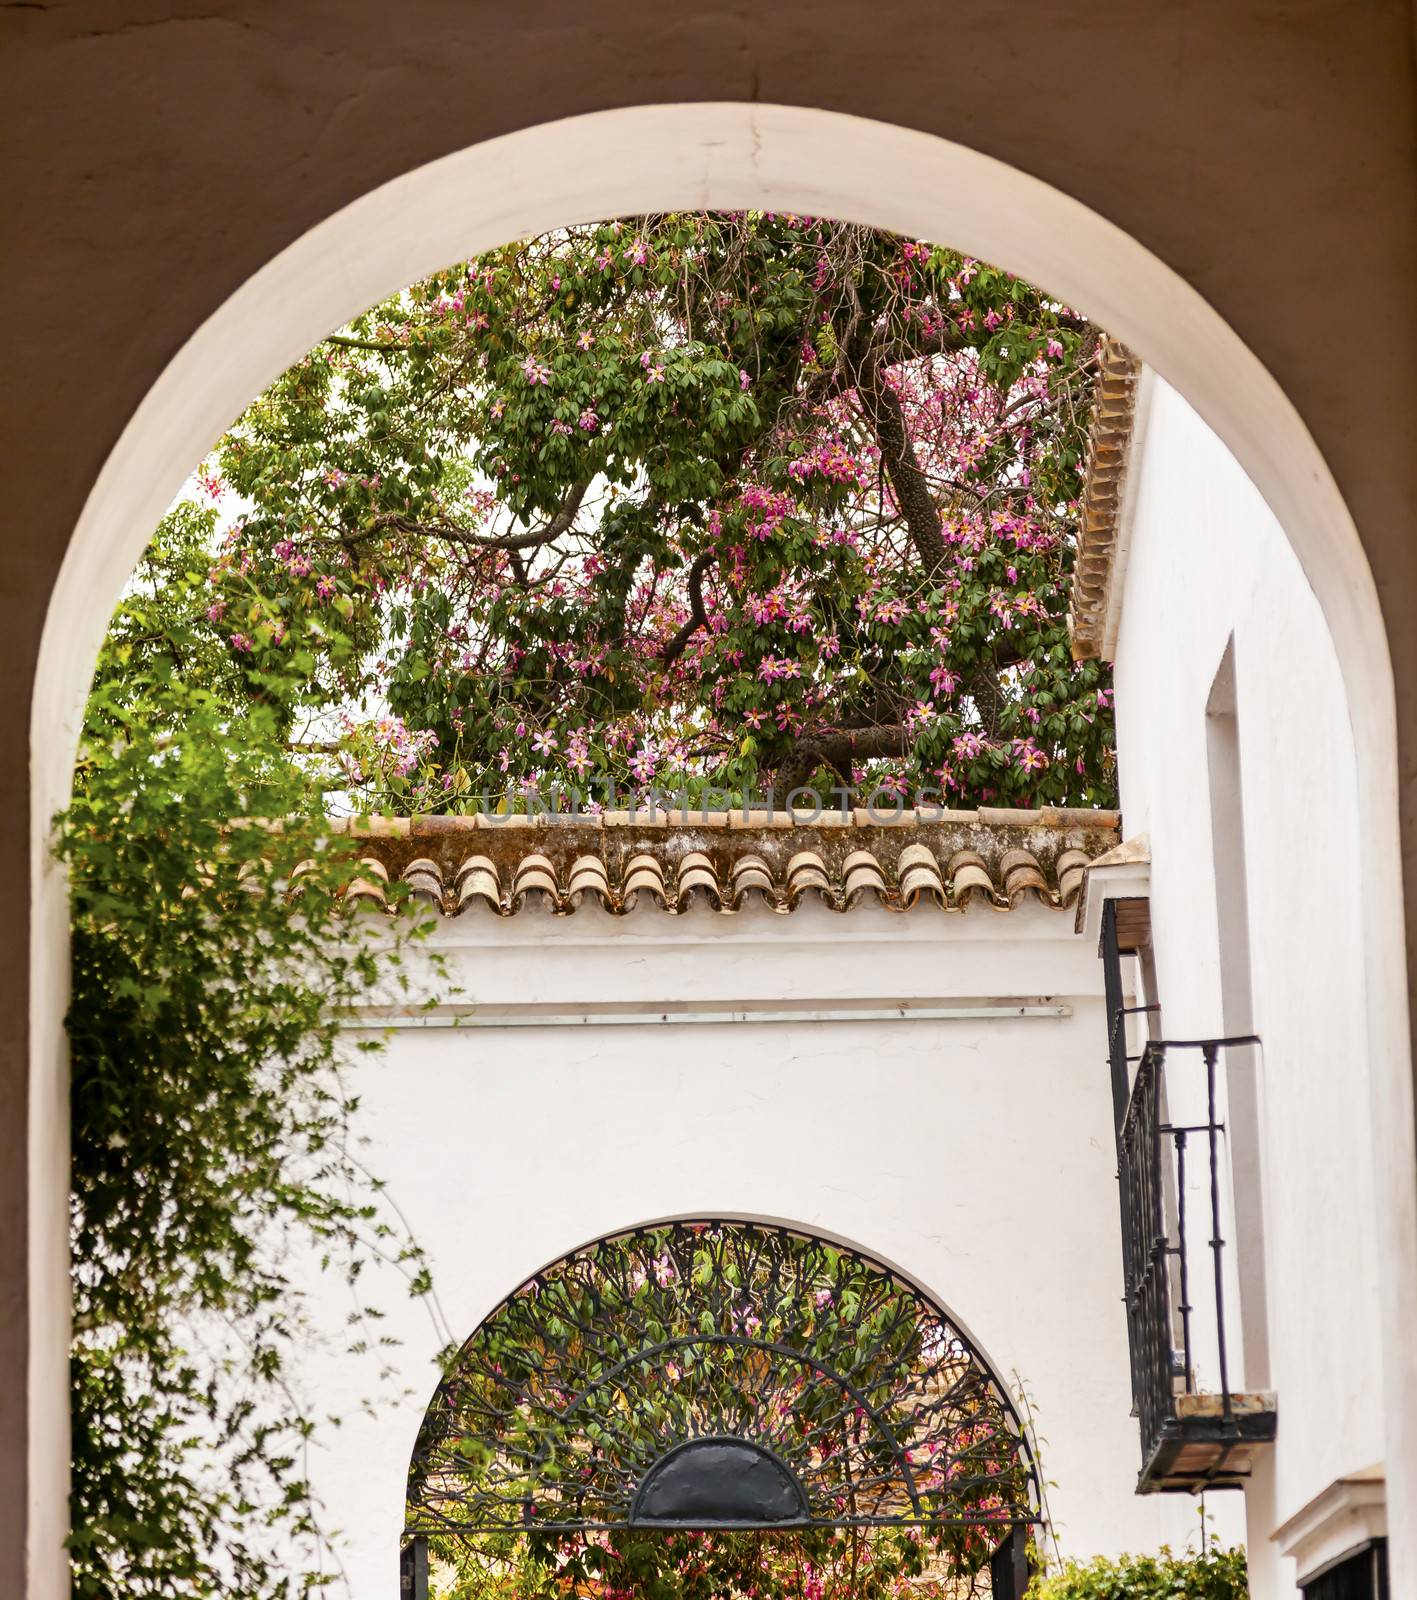 White Horseshoe Arches Pink Flowers Alcazar Royal Palace Seville by bill_perry